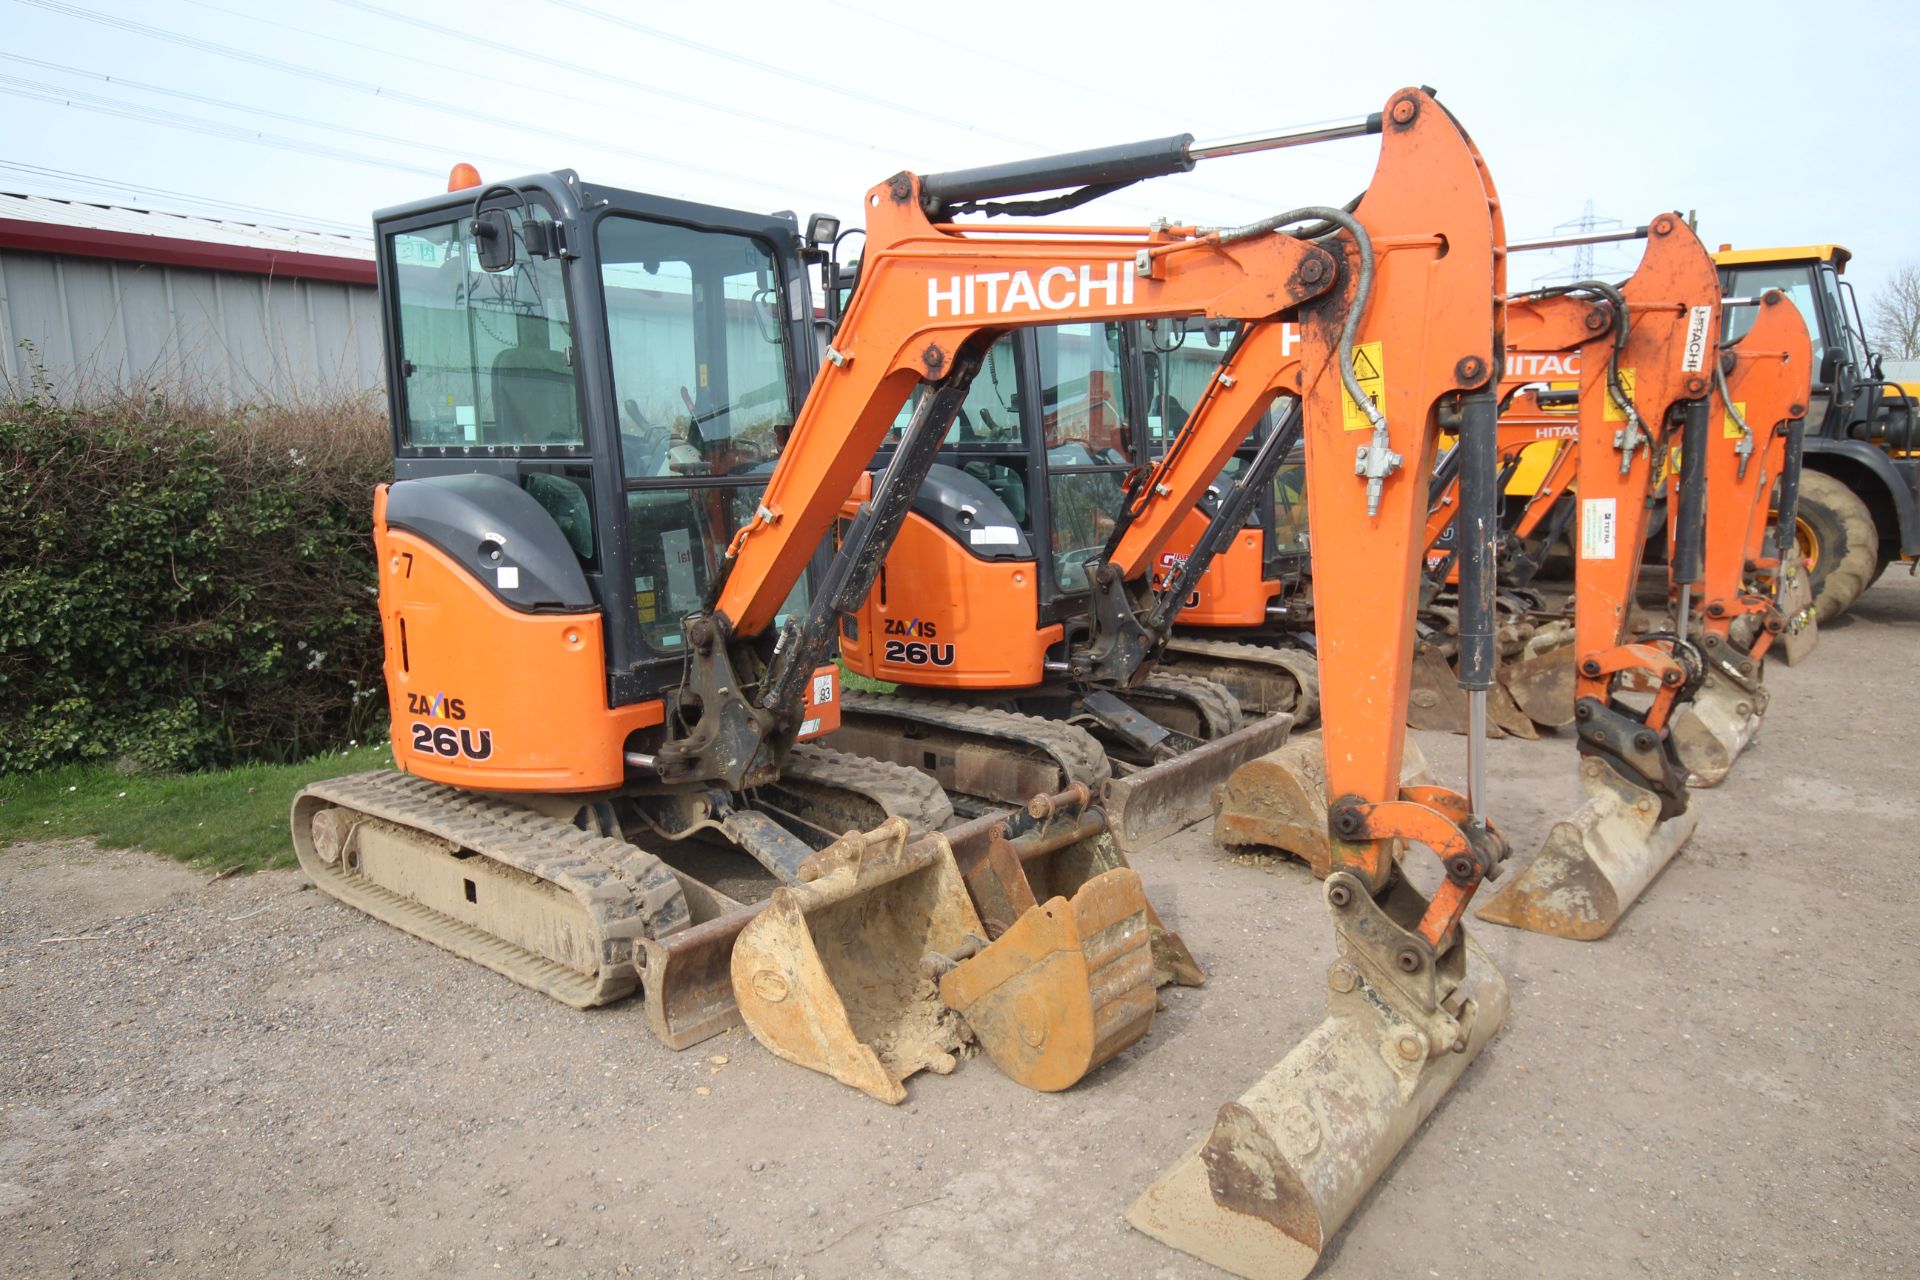 Hitachi Z-Axis 26U-5a 2.6T rubber track excavator. 2018. 2,061 hours. Serial number HCM